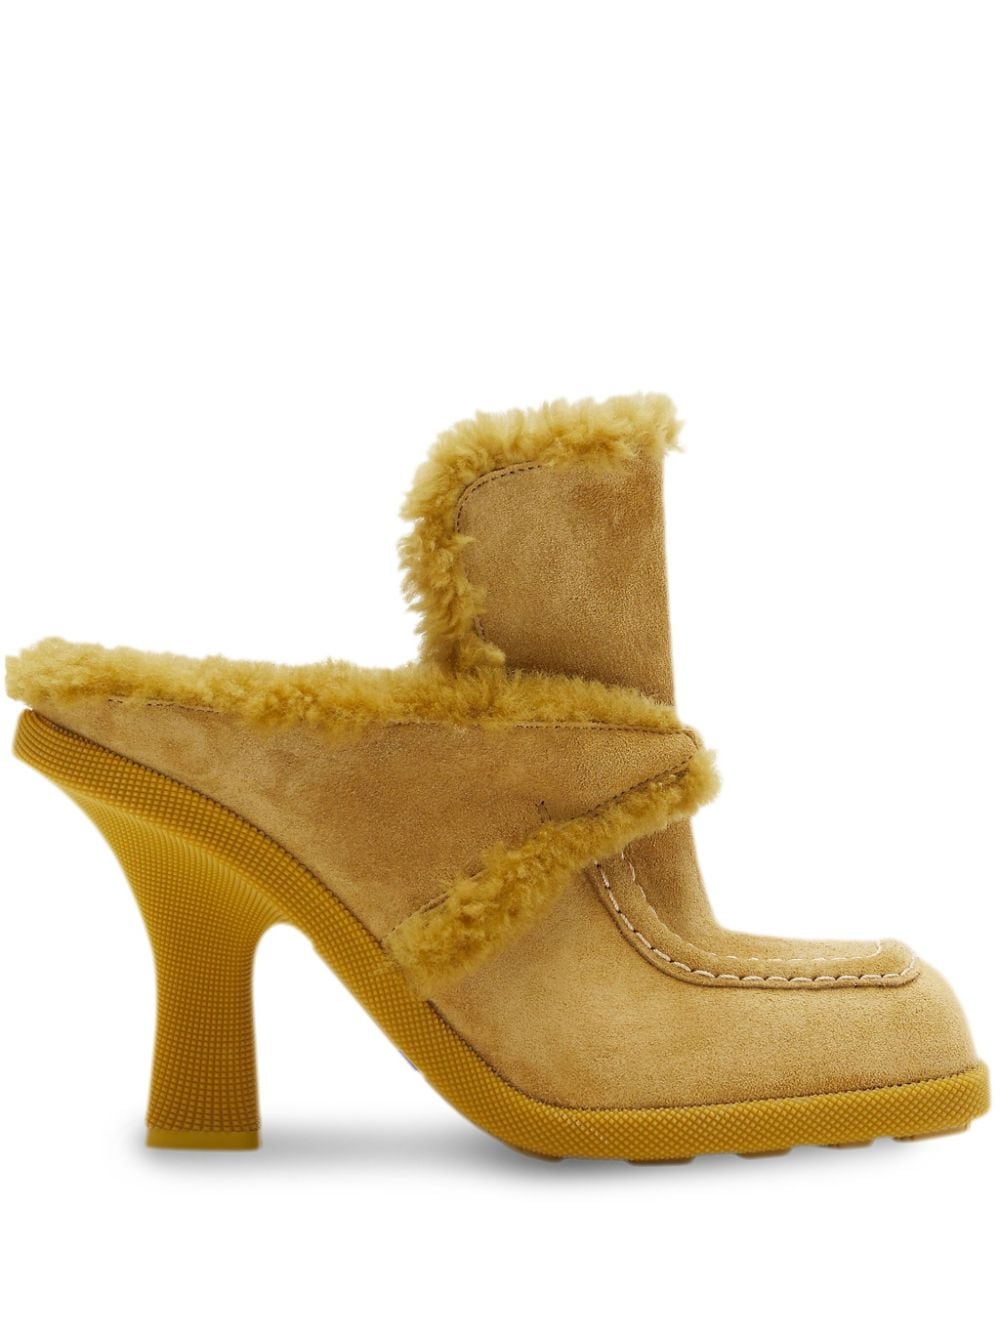 Burberry Highland shearling-trim suede mules - Yellow von Burberry